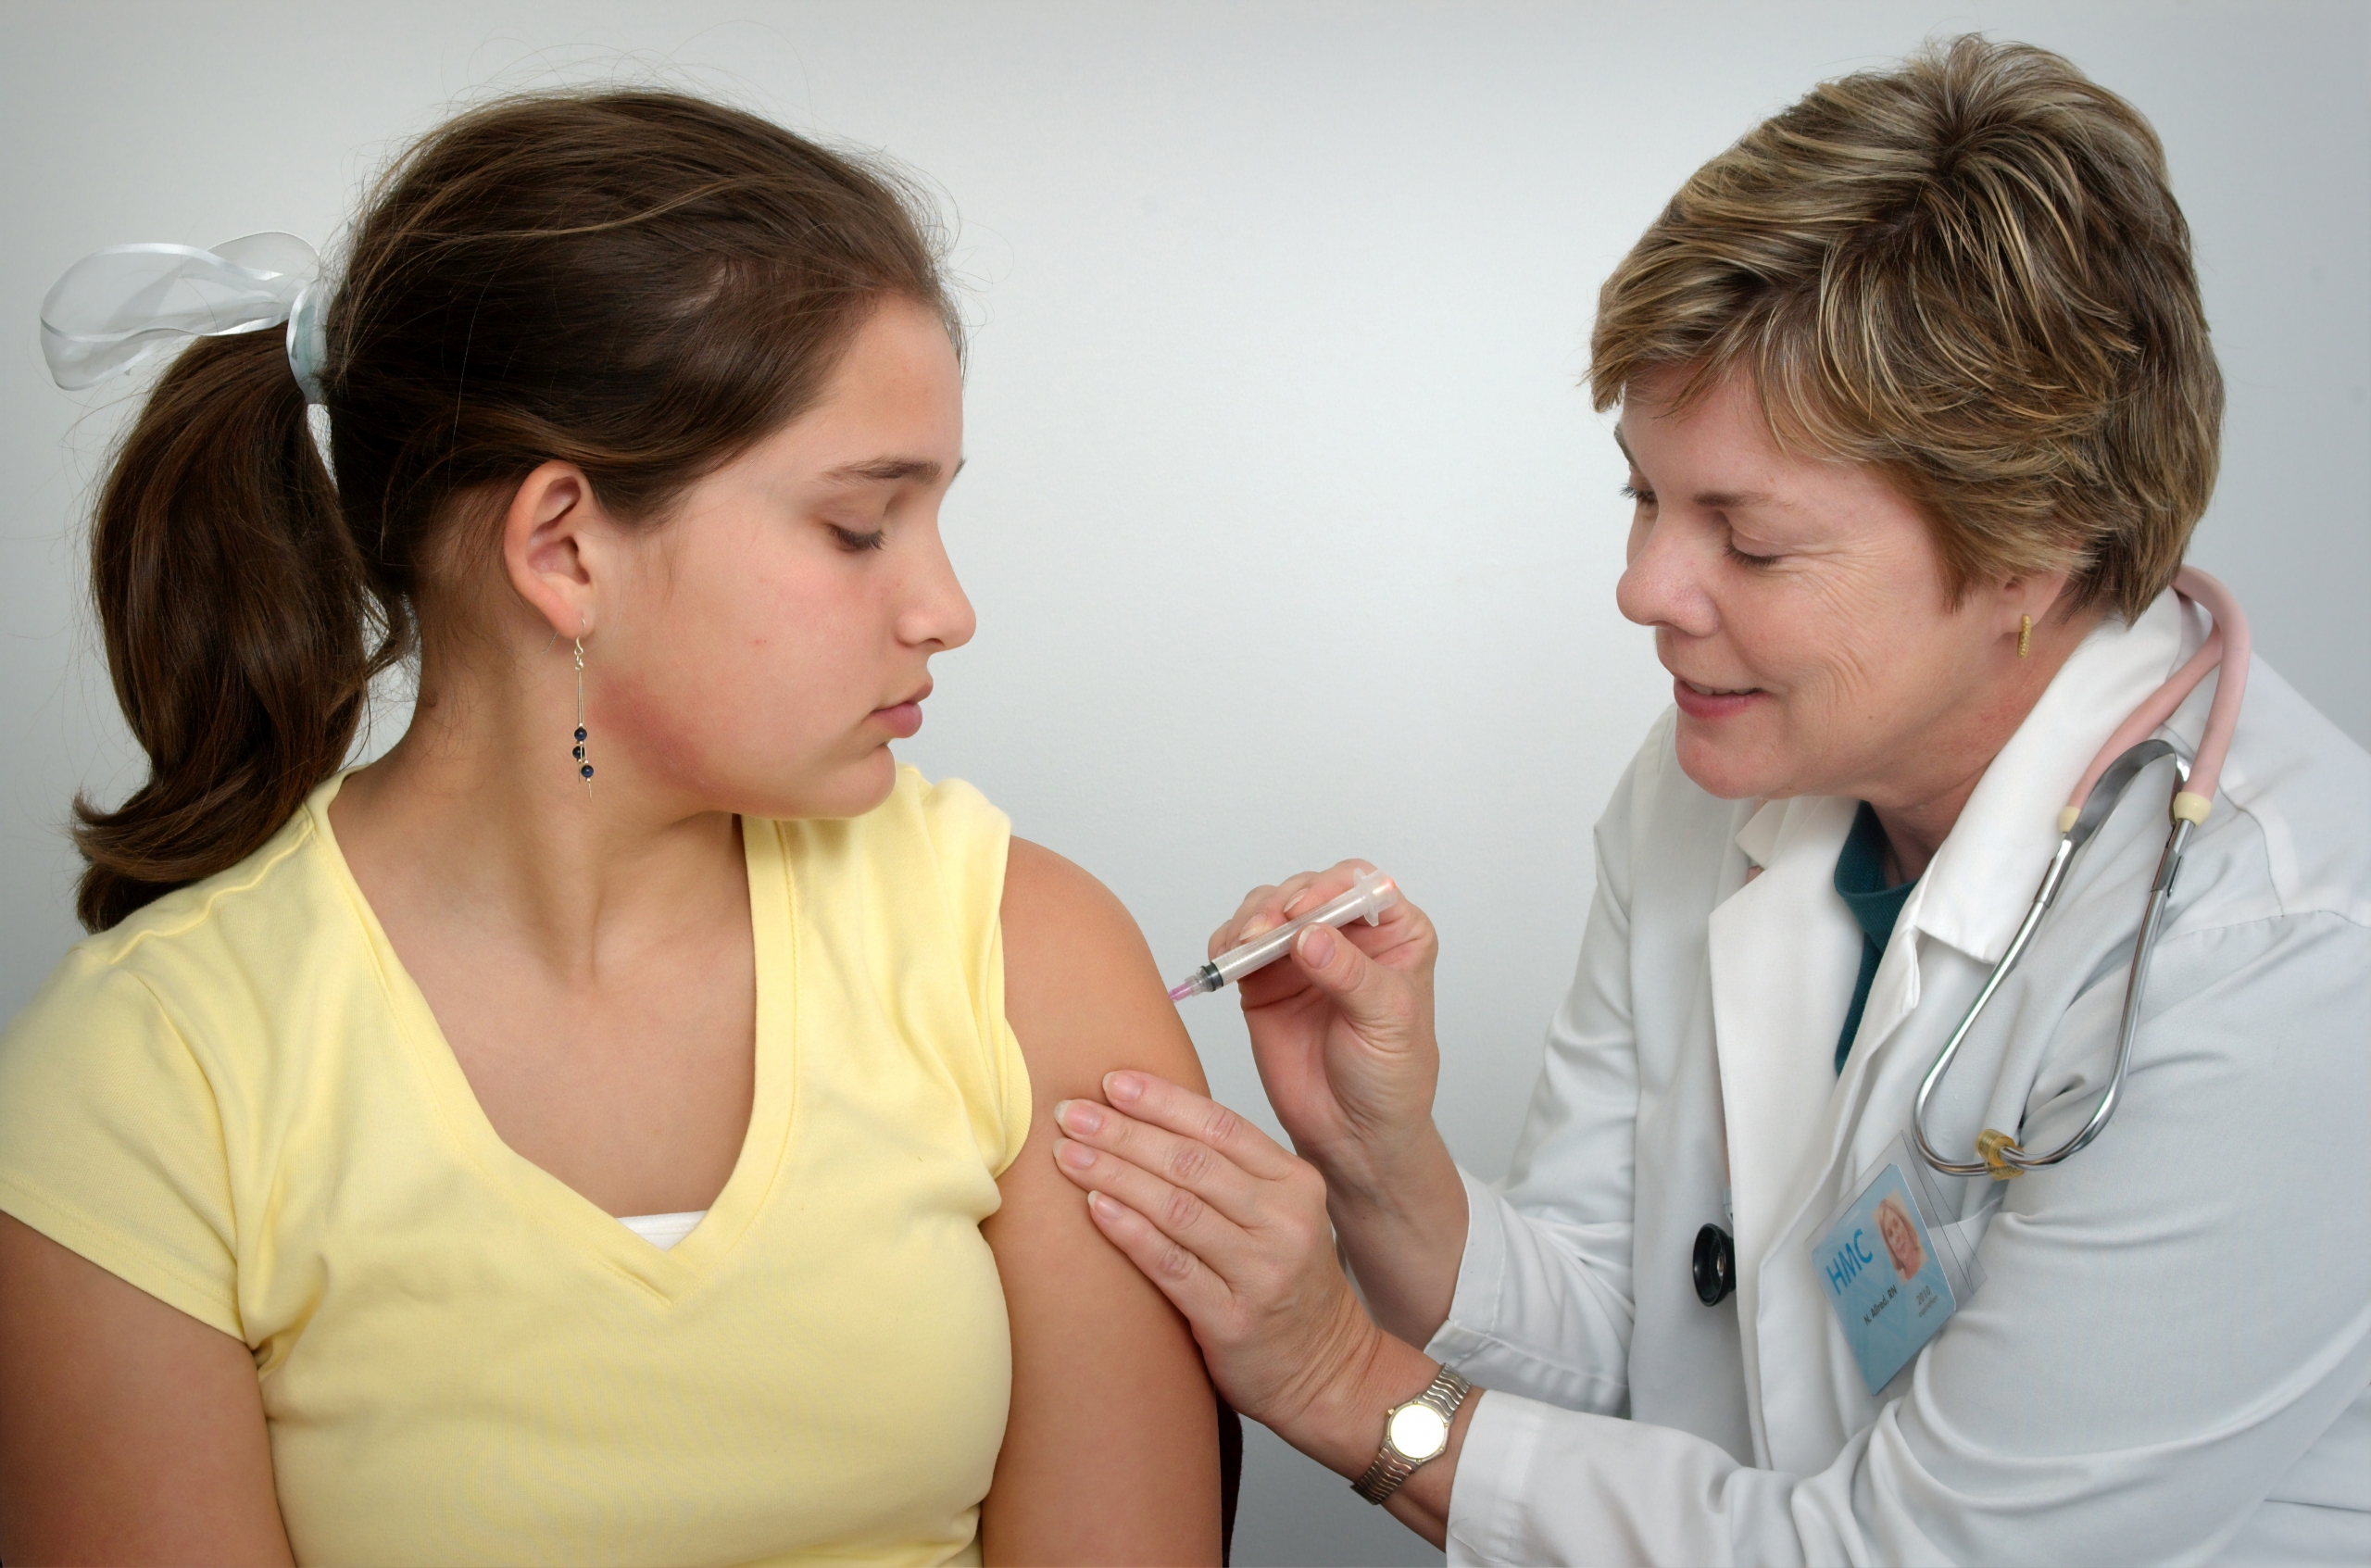 Risk management and vaccination